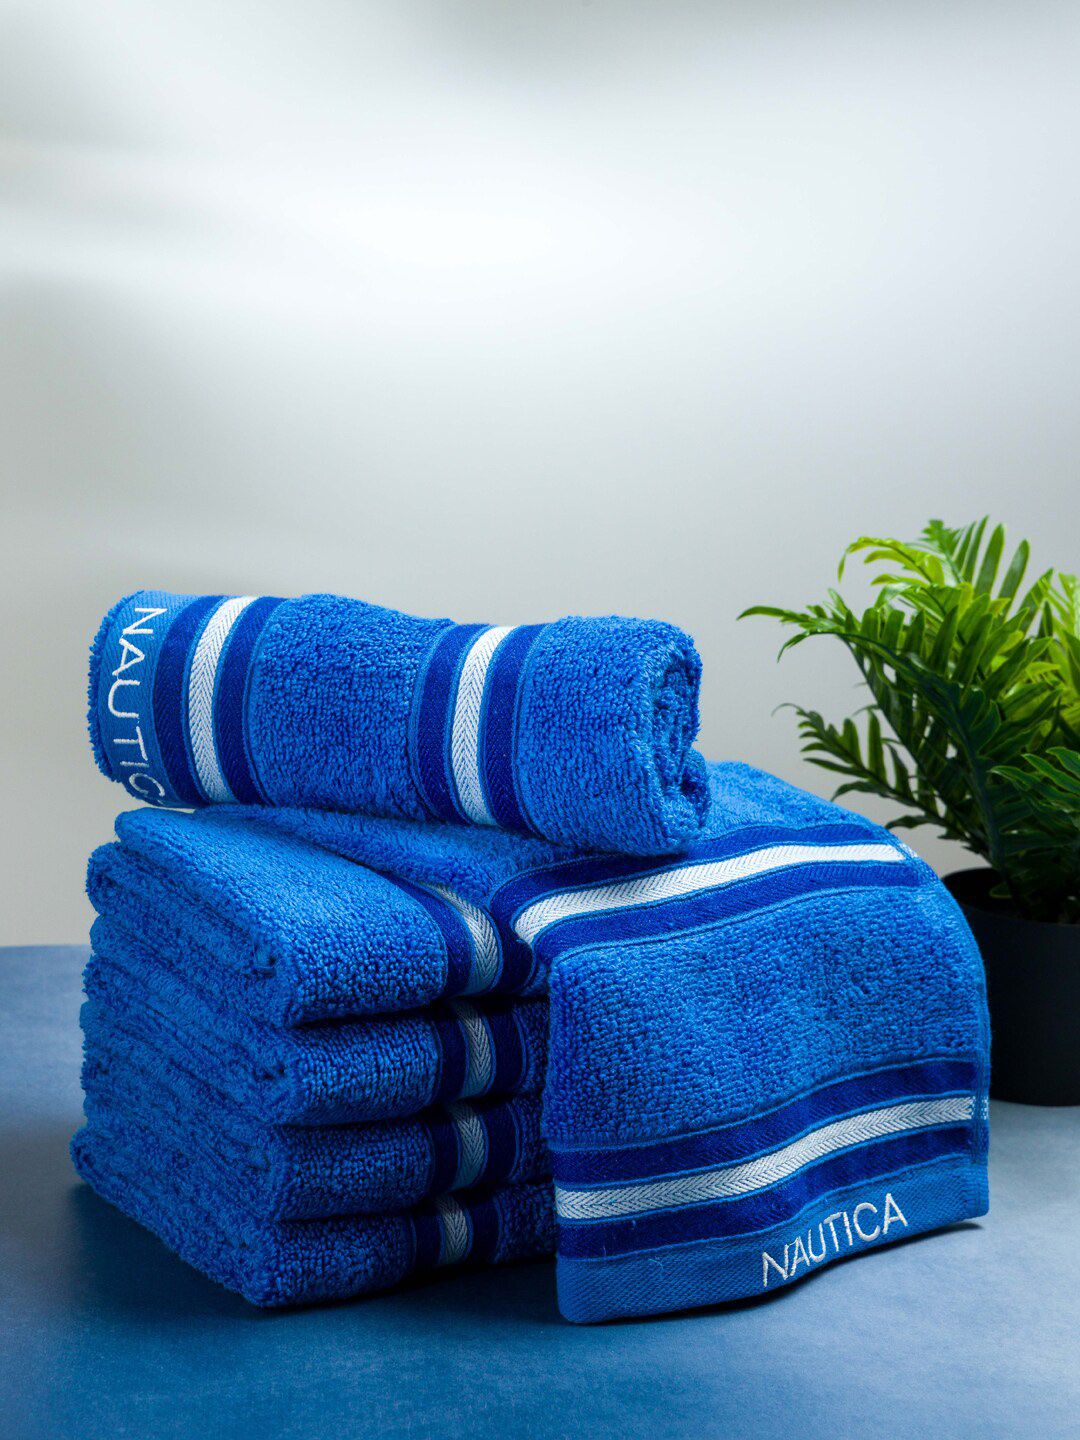 Nautica Set of 6 Blue Striped 500 GSM Pure Cotton Towel Set Price in India